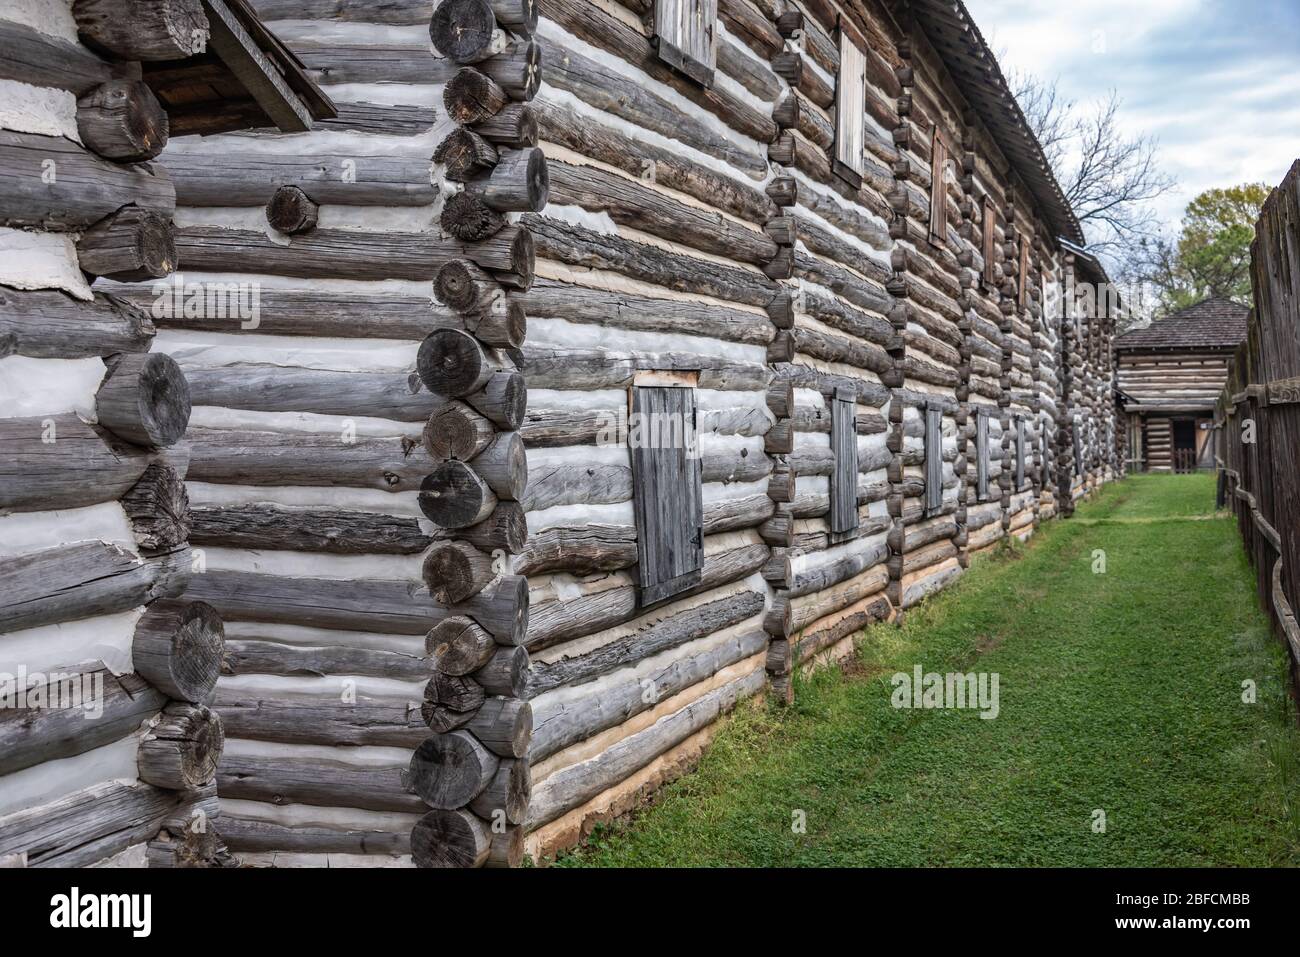 Stockade at Fort Gibson, a historic military site in Oklahoma that guarded the American frontier in Indian Territory from 1824 until 1888. Stock Photo